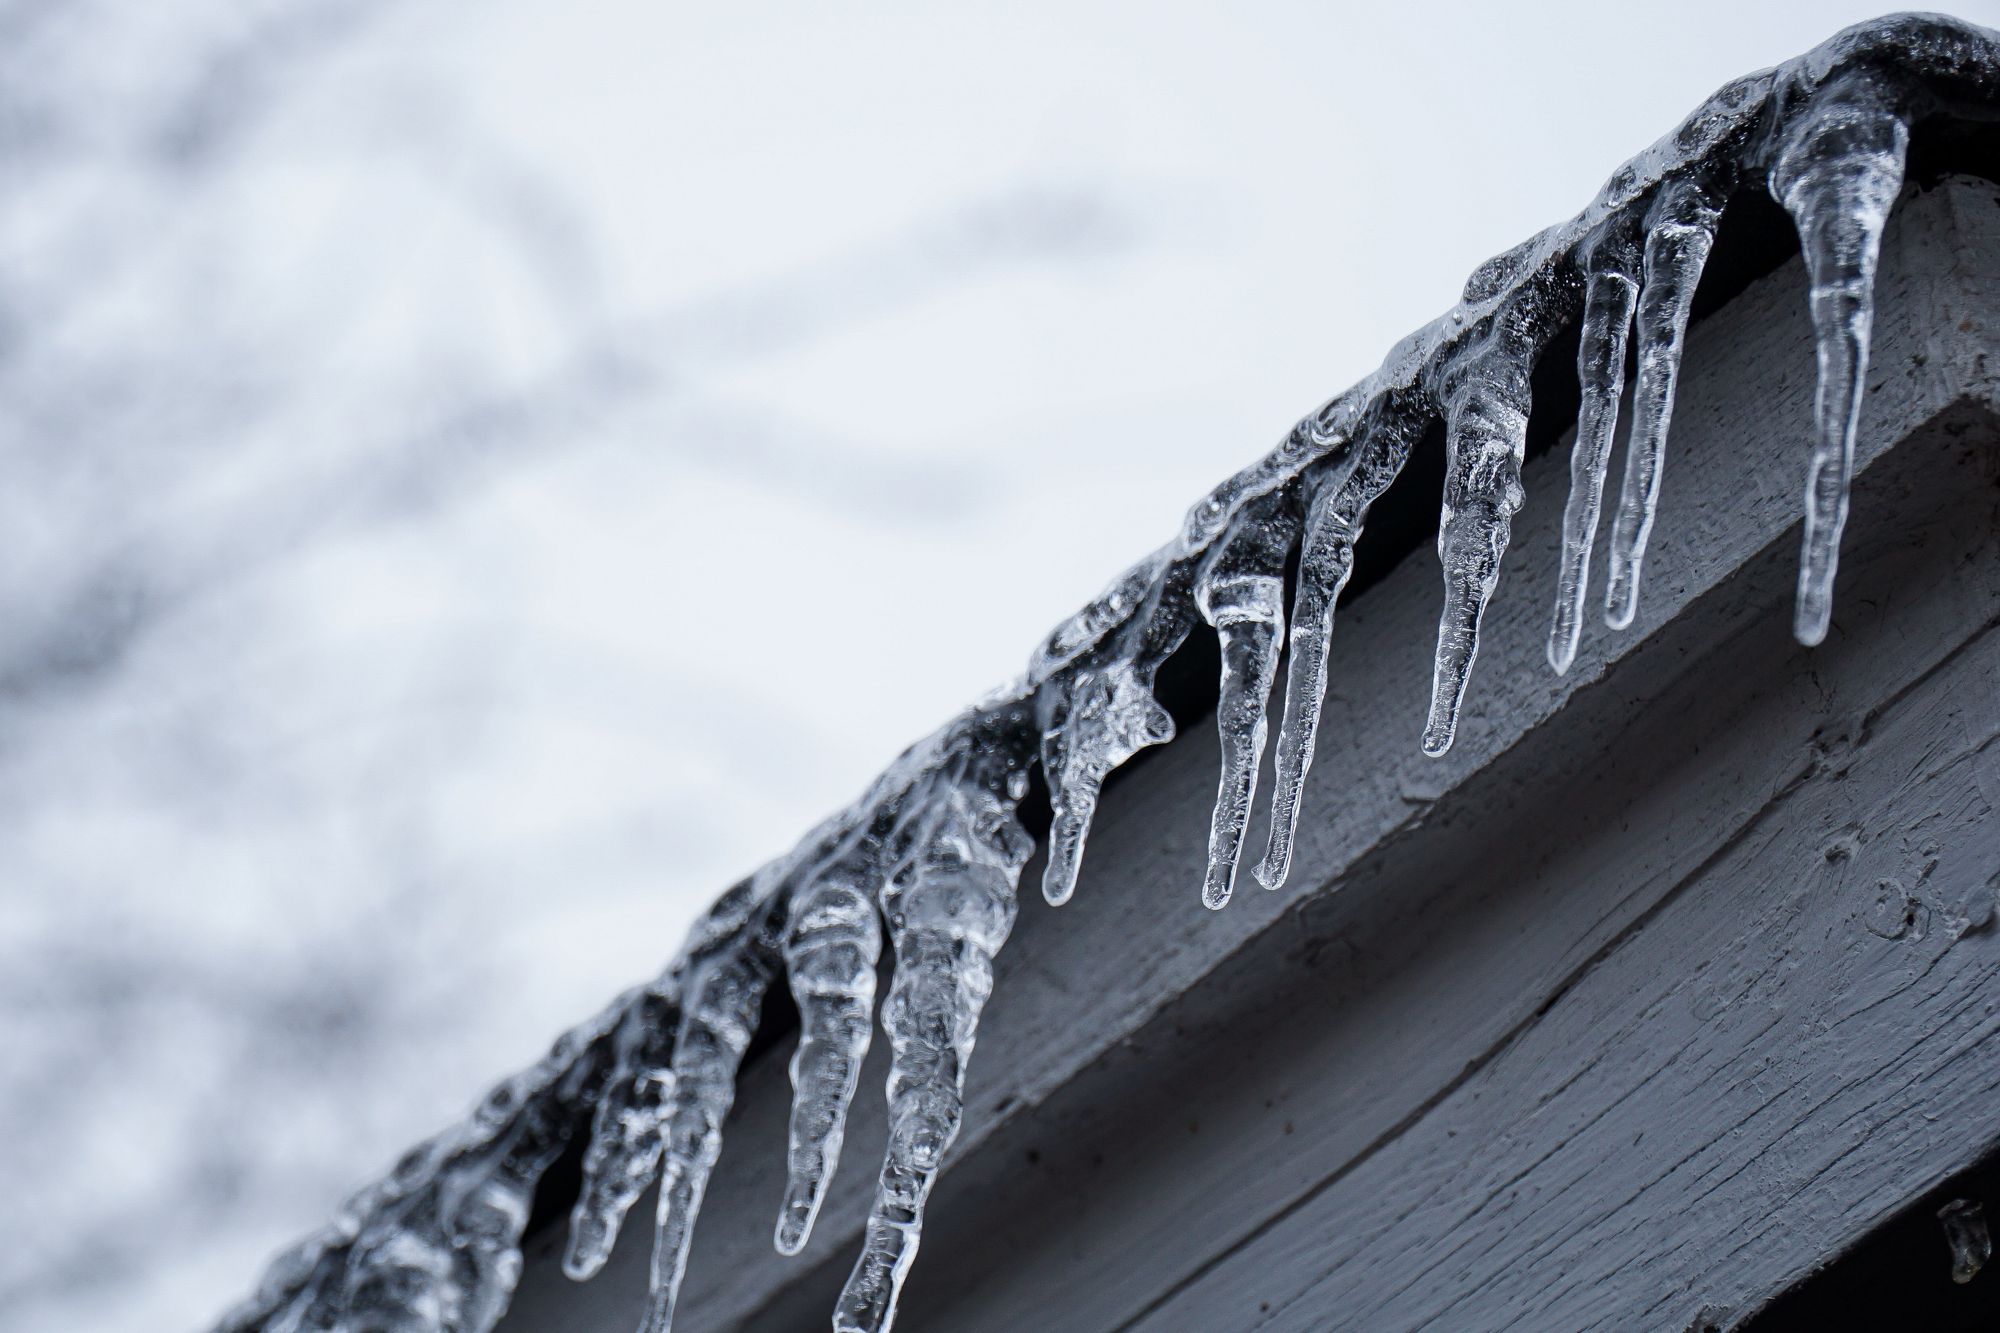 Icicles handing off the side of a roof.